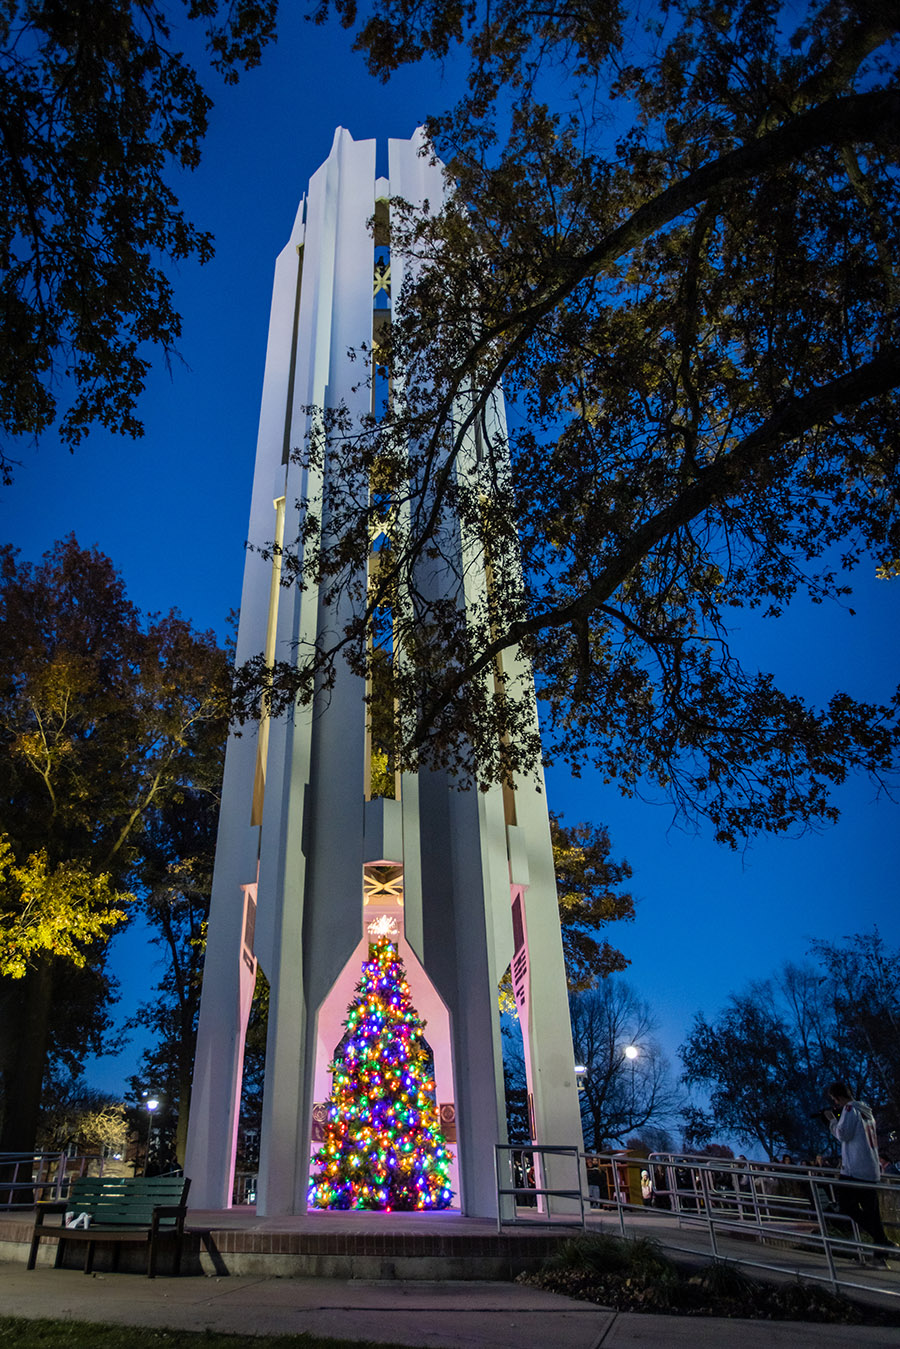 The Holiday Tree Lighting ceremony has been a tradition at Northwest since 2009. (Photo by Todd Weddle/Northwest Missouri State University)